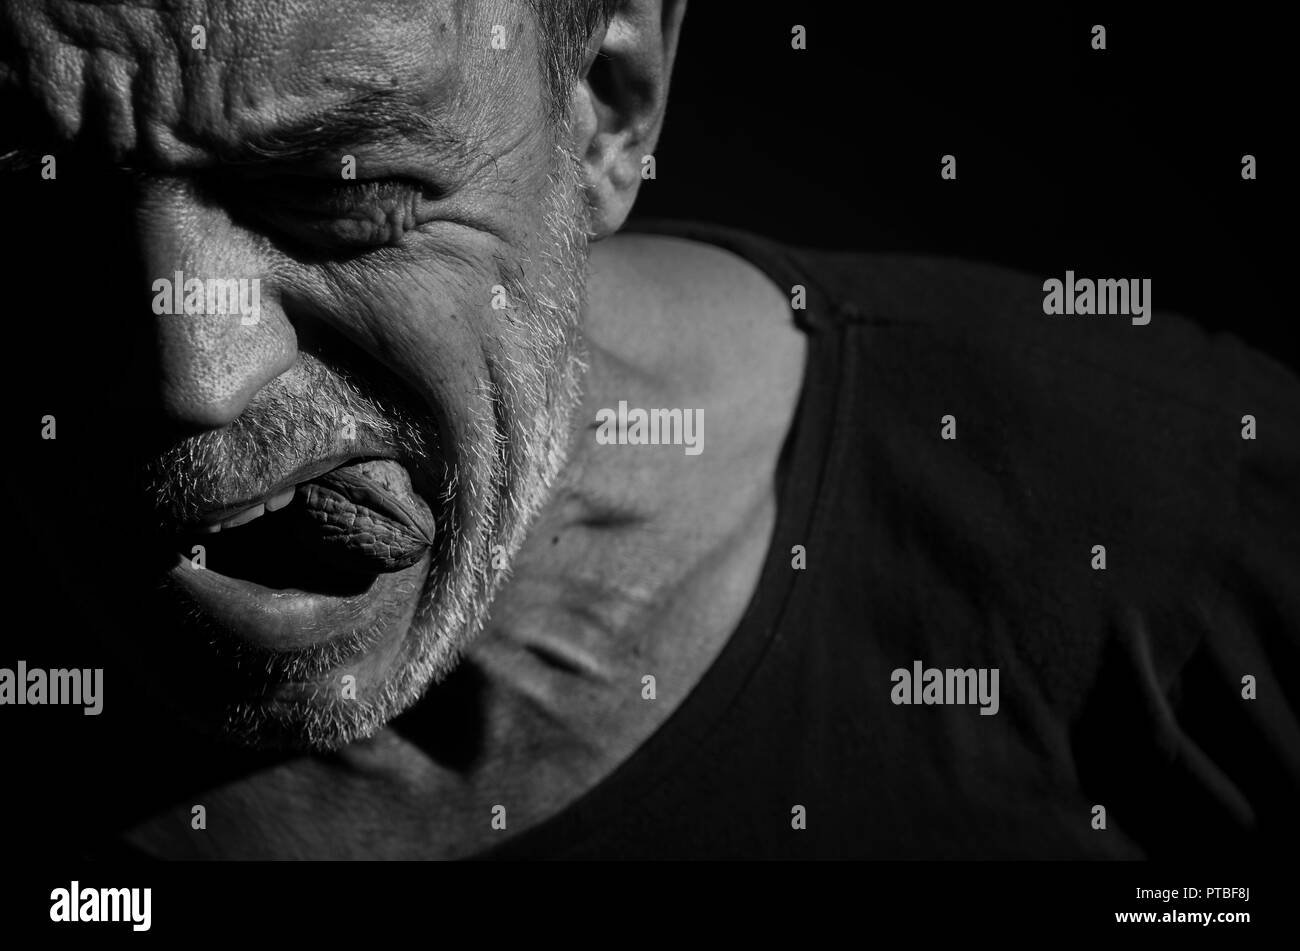 An elderly man is trying to get a nut through his teeth in black and white. Stock Photo